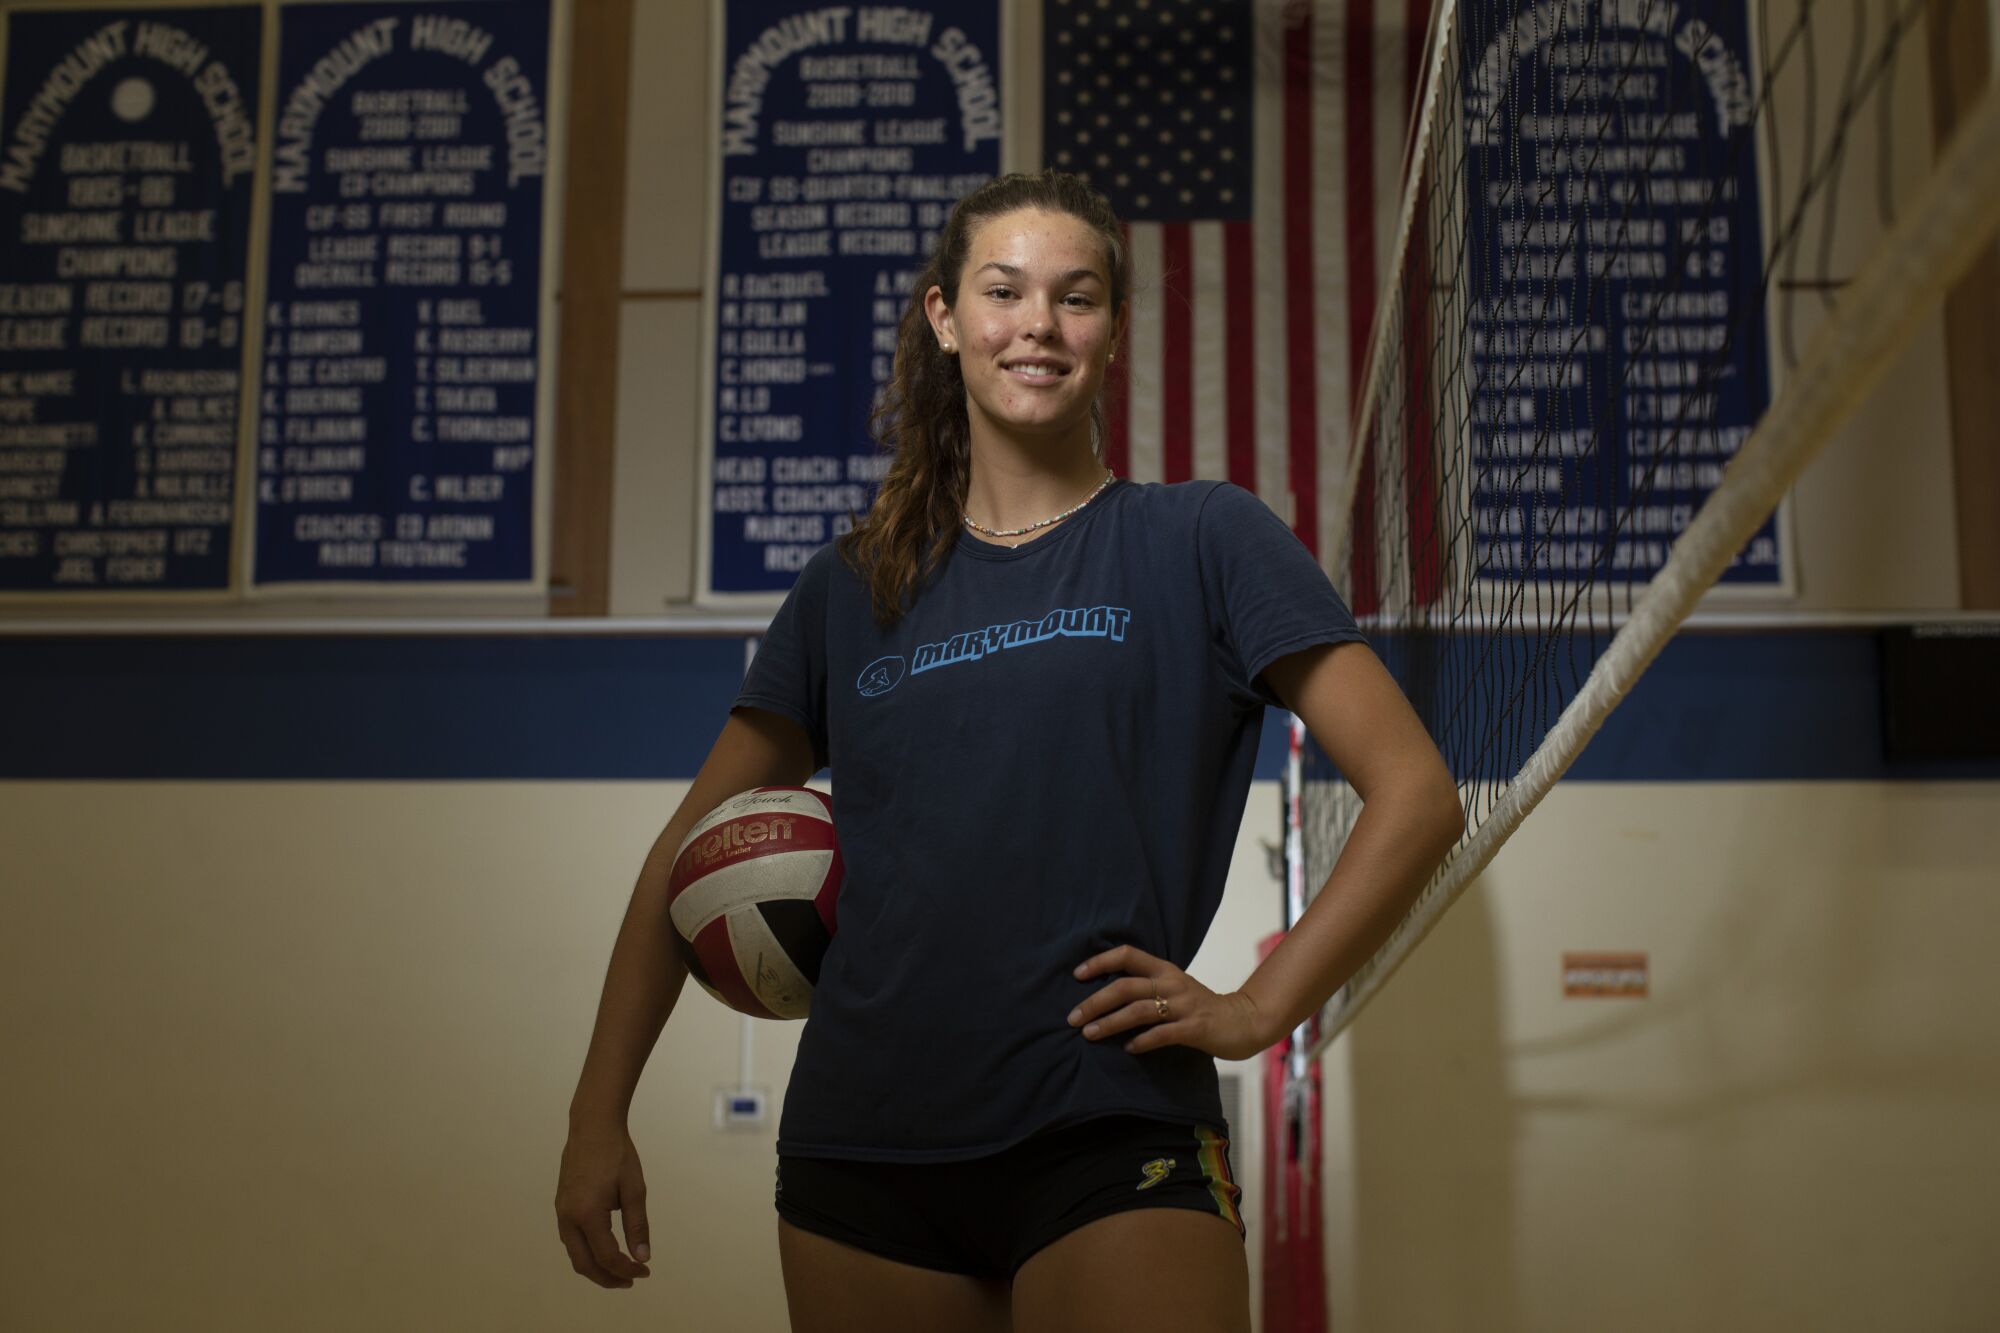 Stanford-bound Elia Rubin of Marymount out for a state title - Los Angeles  Times